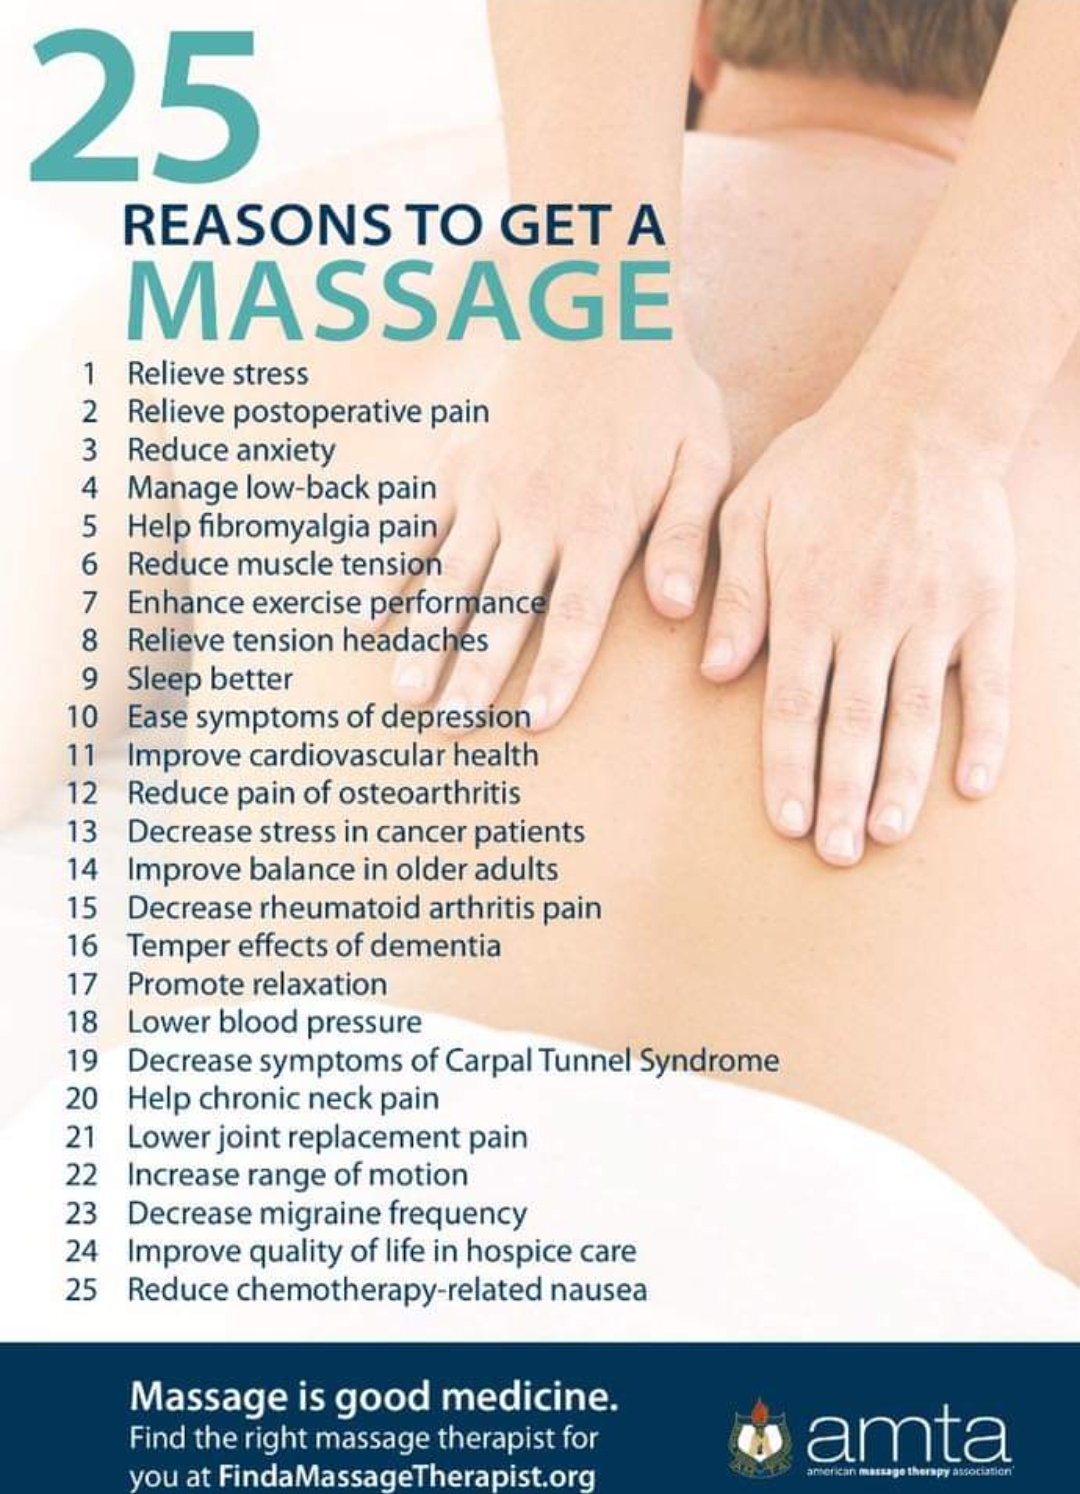 5 Reasons to Treat Yourself to a Massage